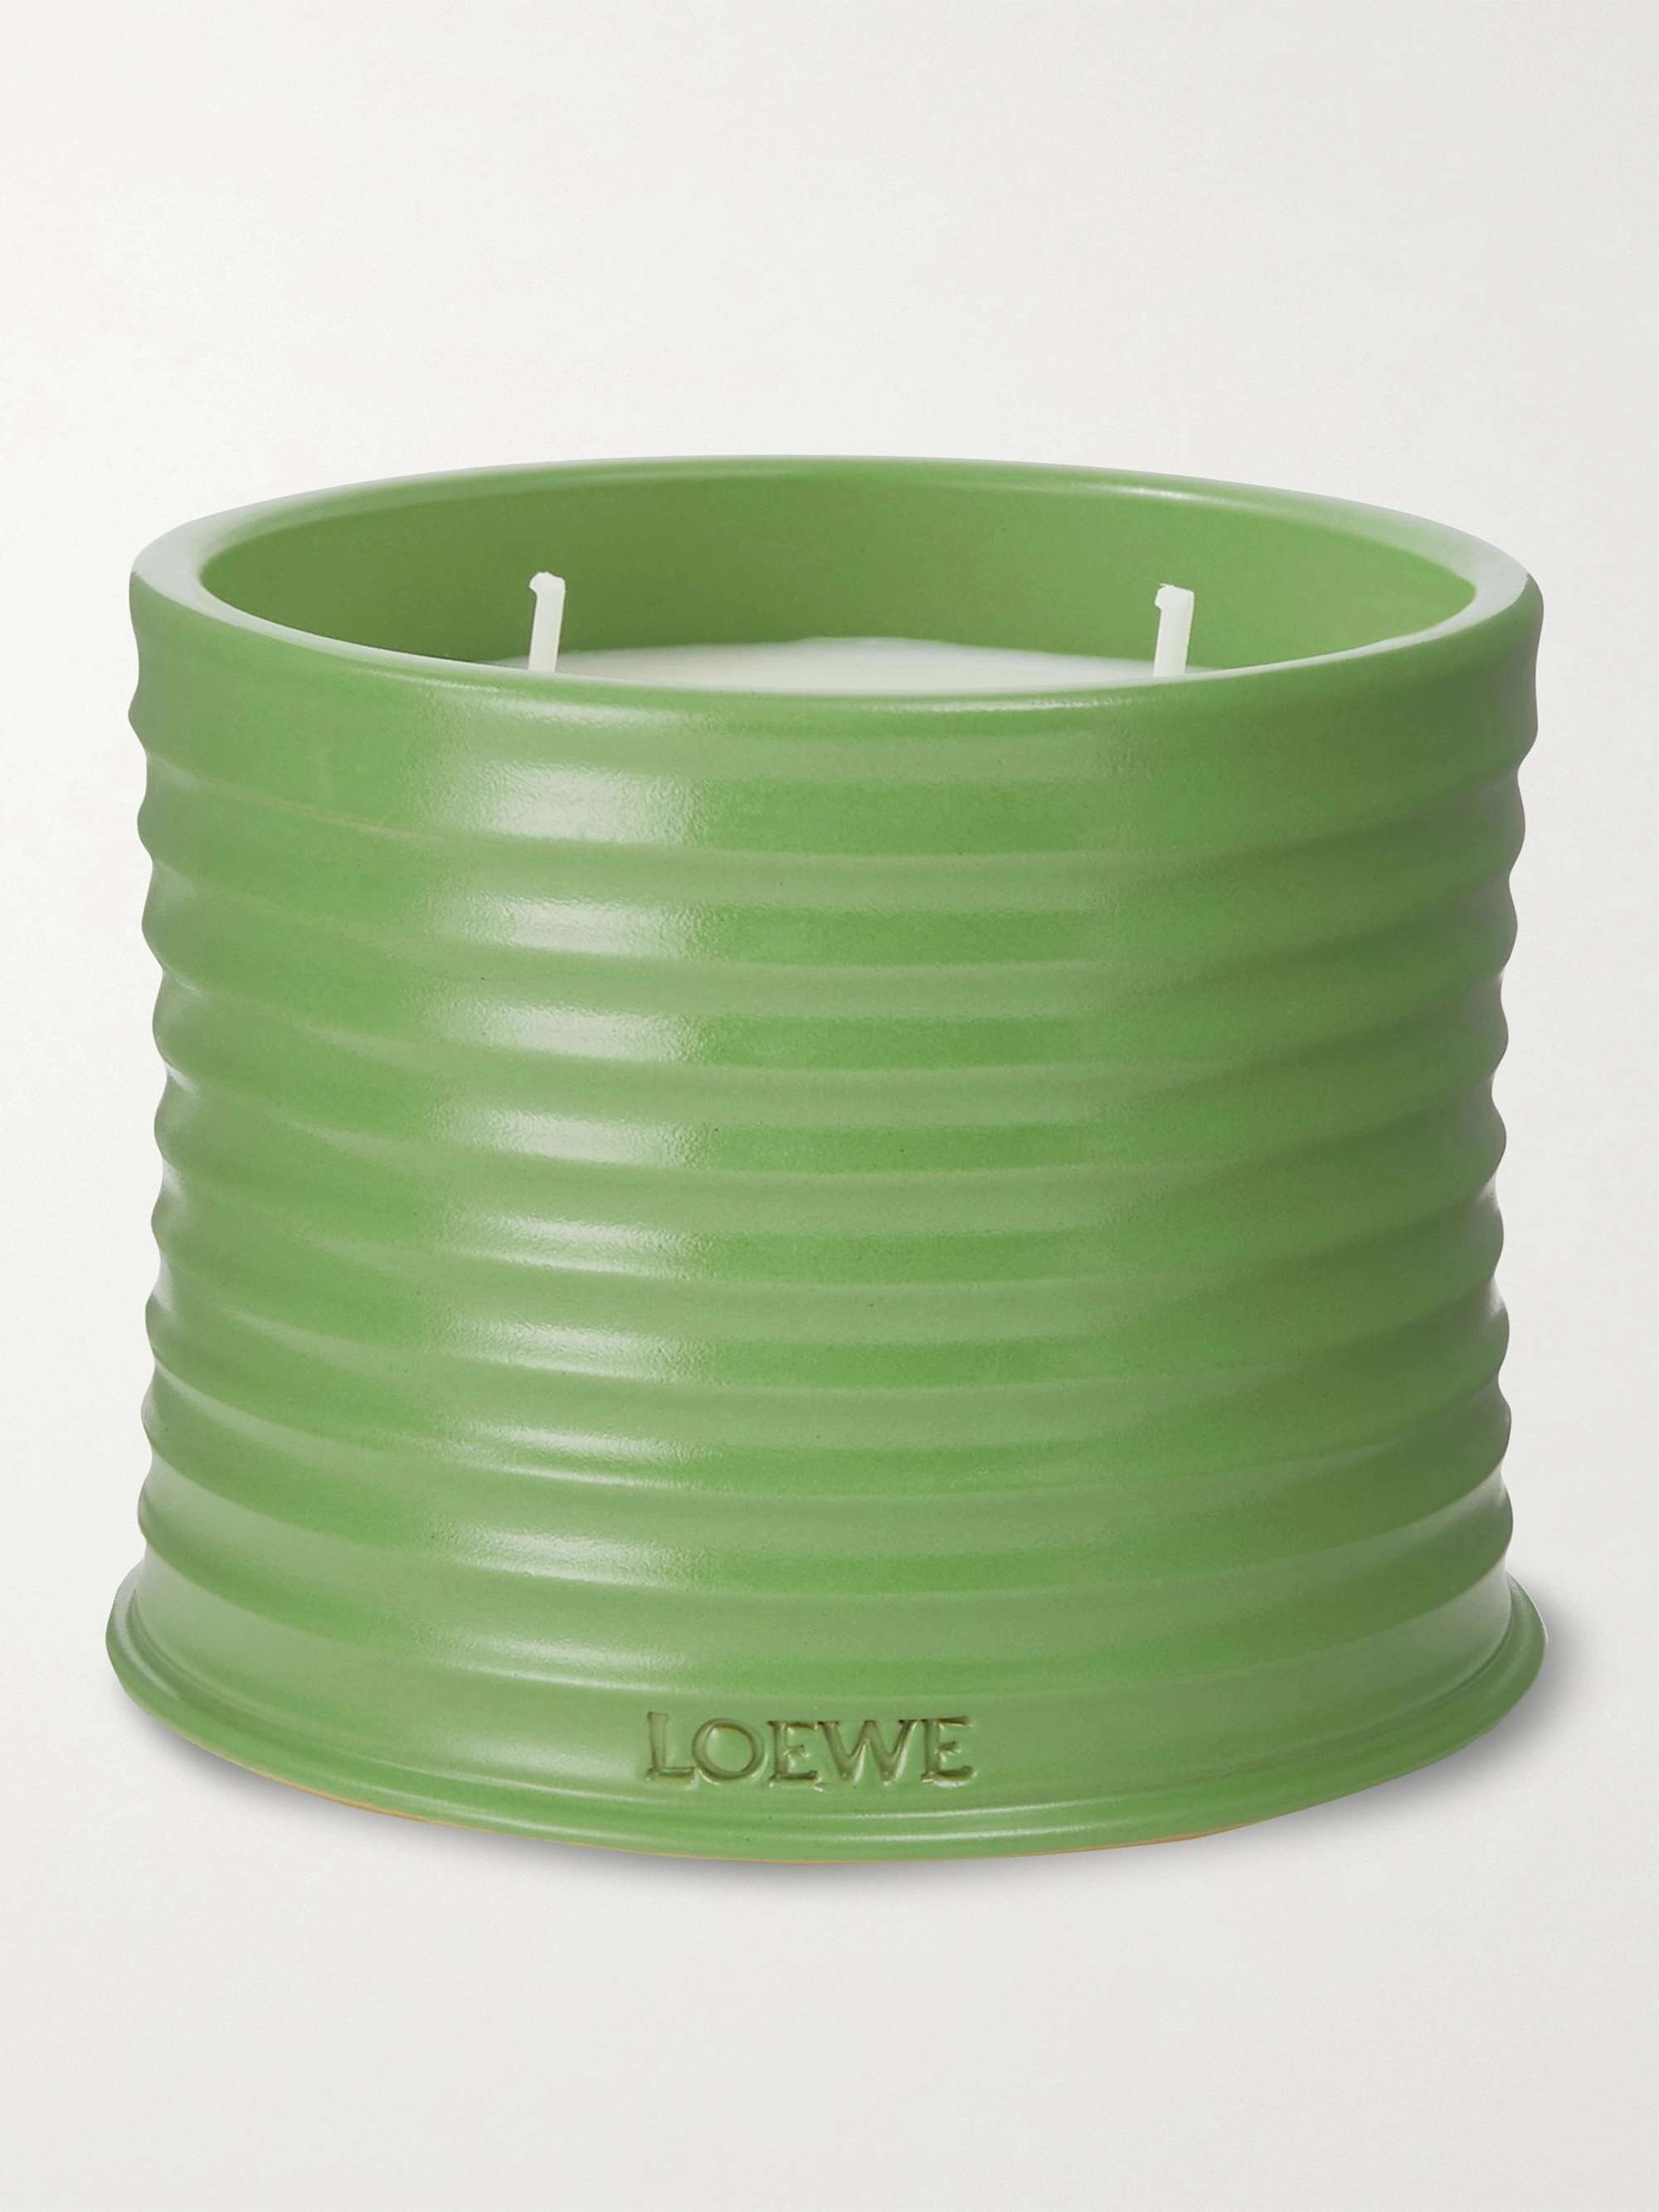 LOEWE HOME SCENTS Luscious Pea Scented Candle, 170g